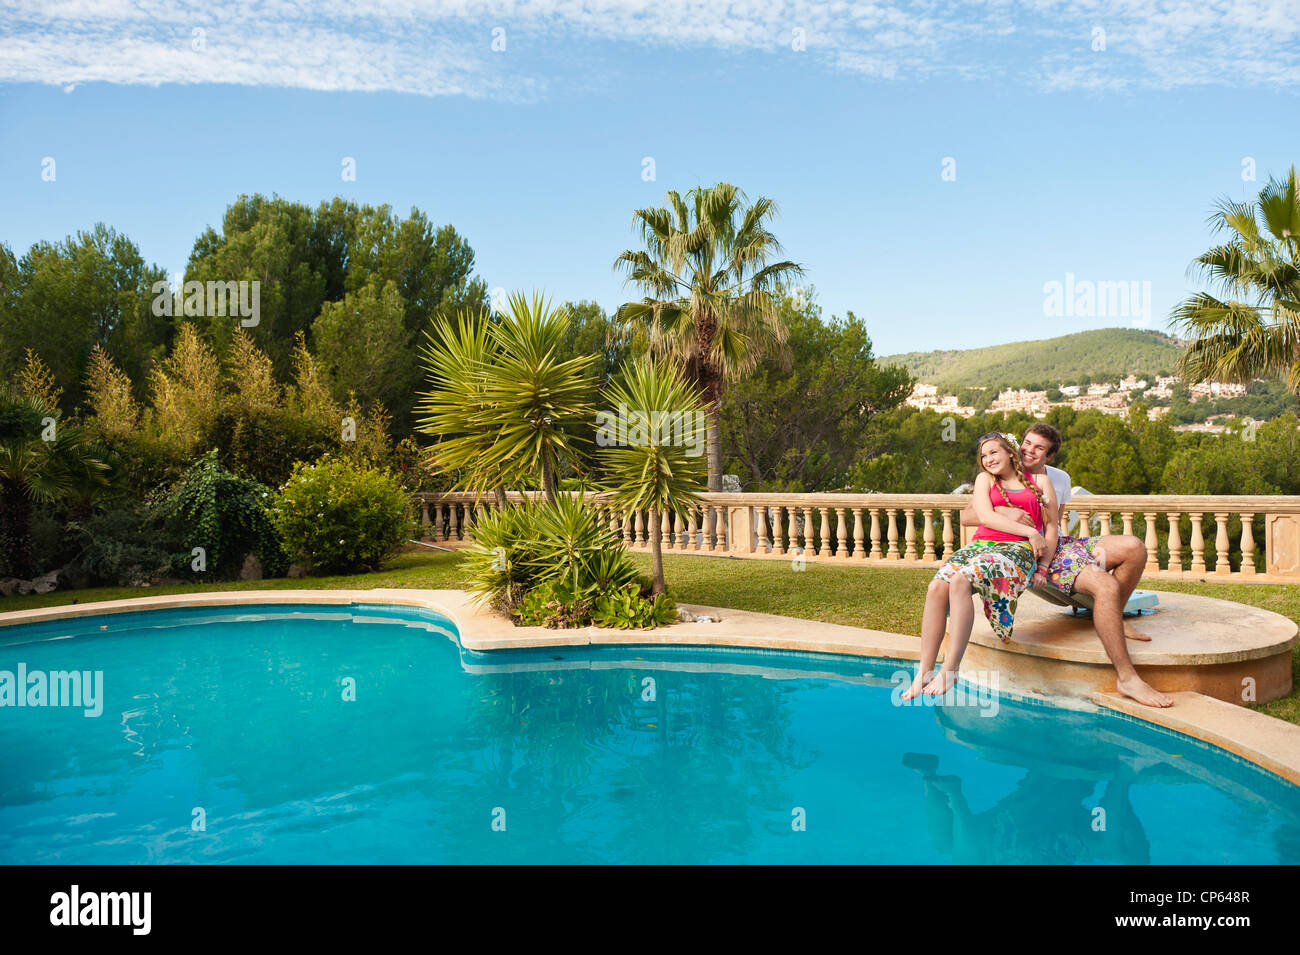 Spain, Mallorca, Couple sitting on diving board at swimming pool, smiling Stock Photo